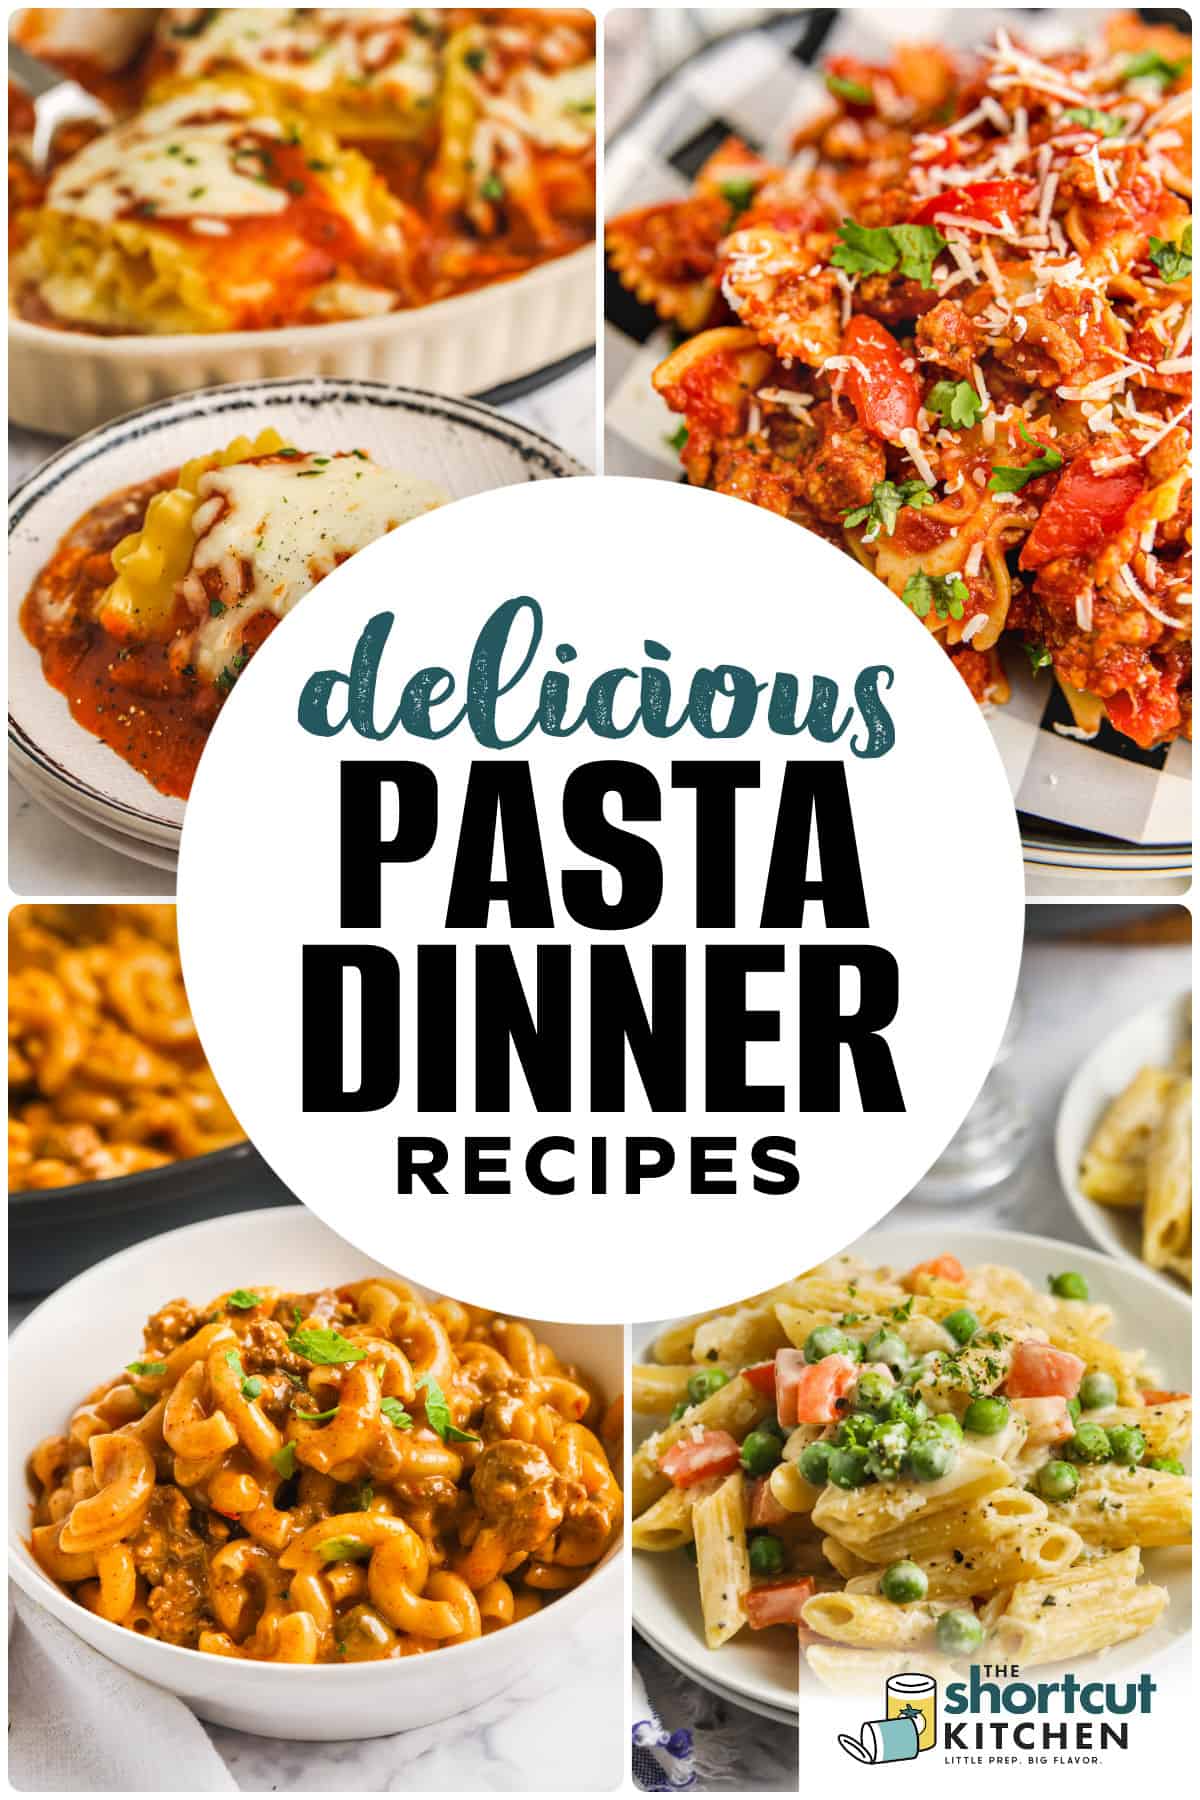 photos of Pasta Dinner Recipes with a title